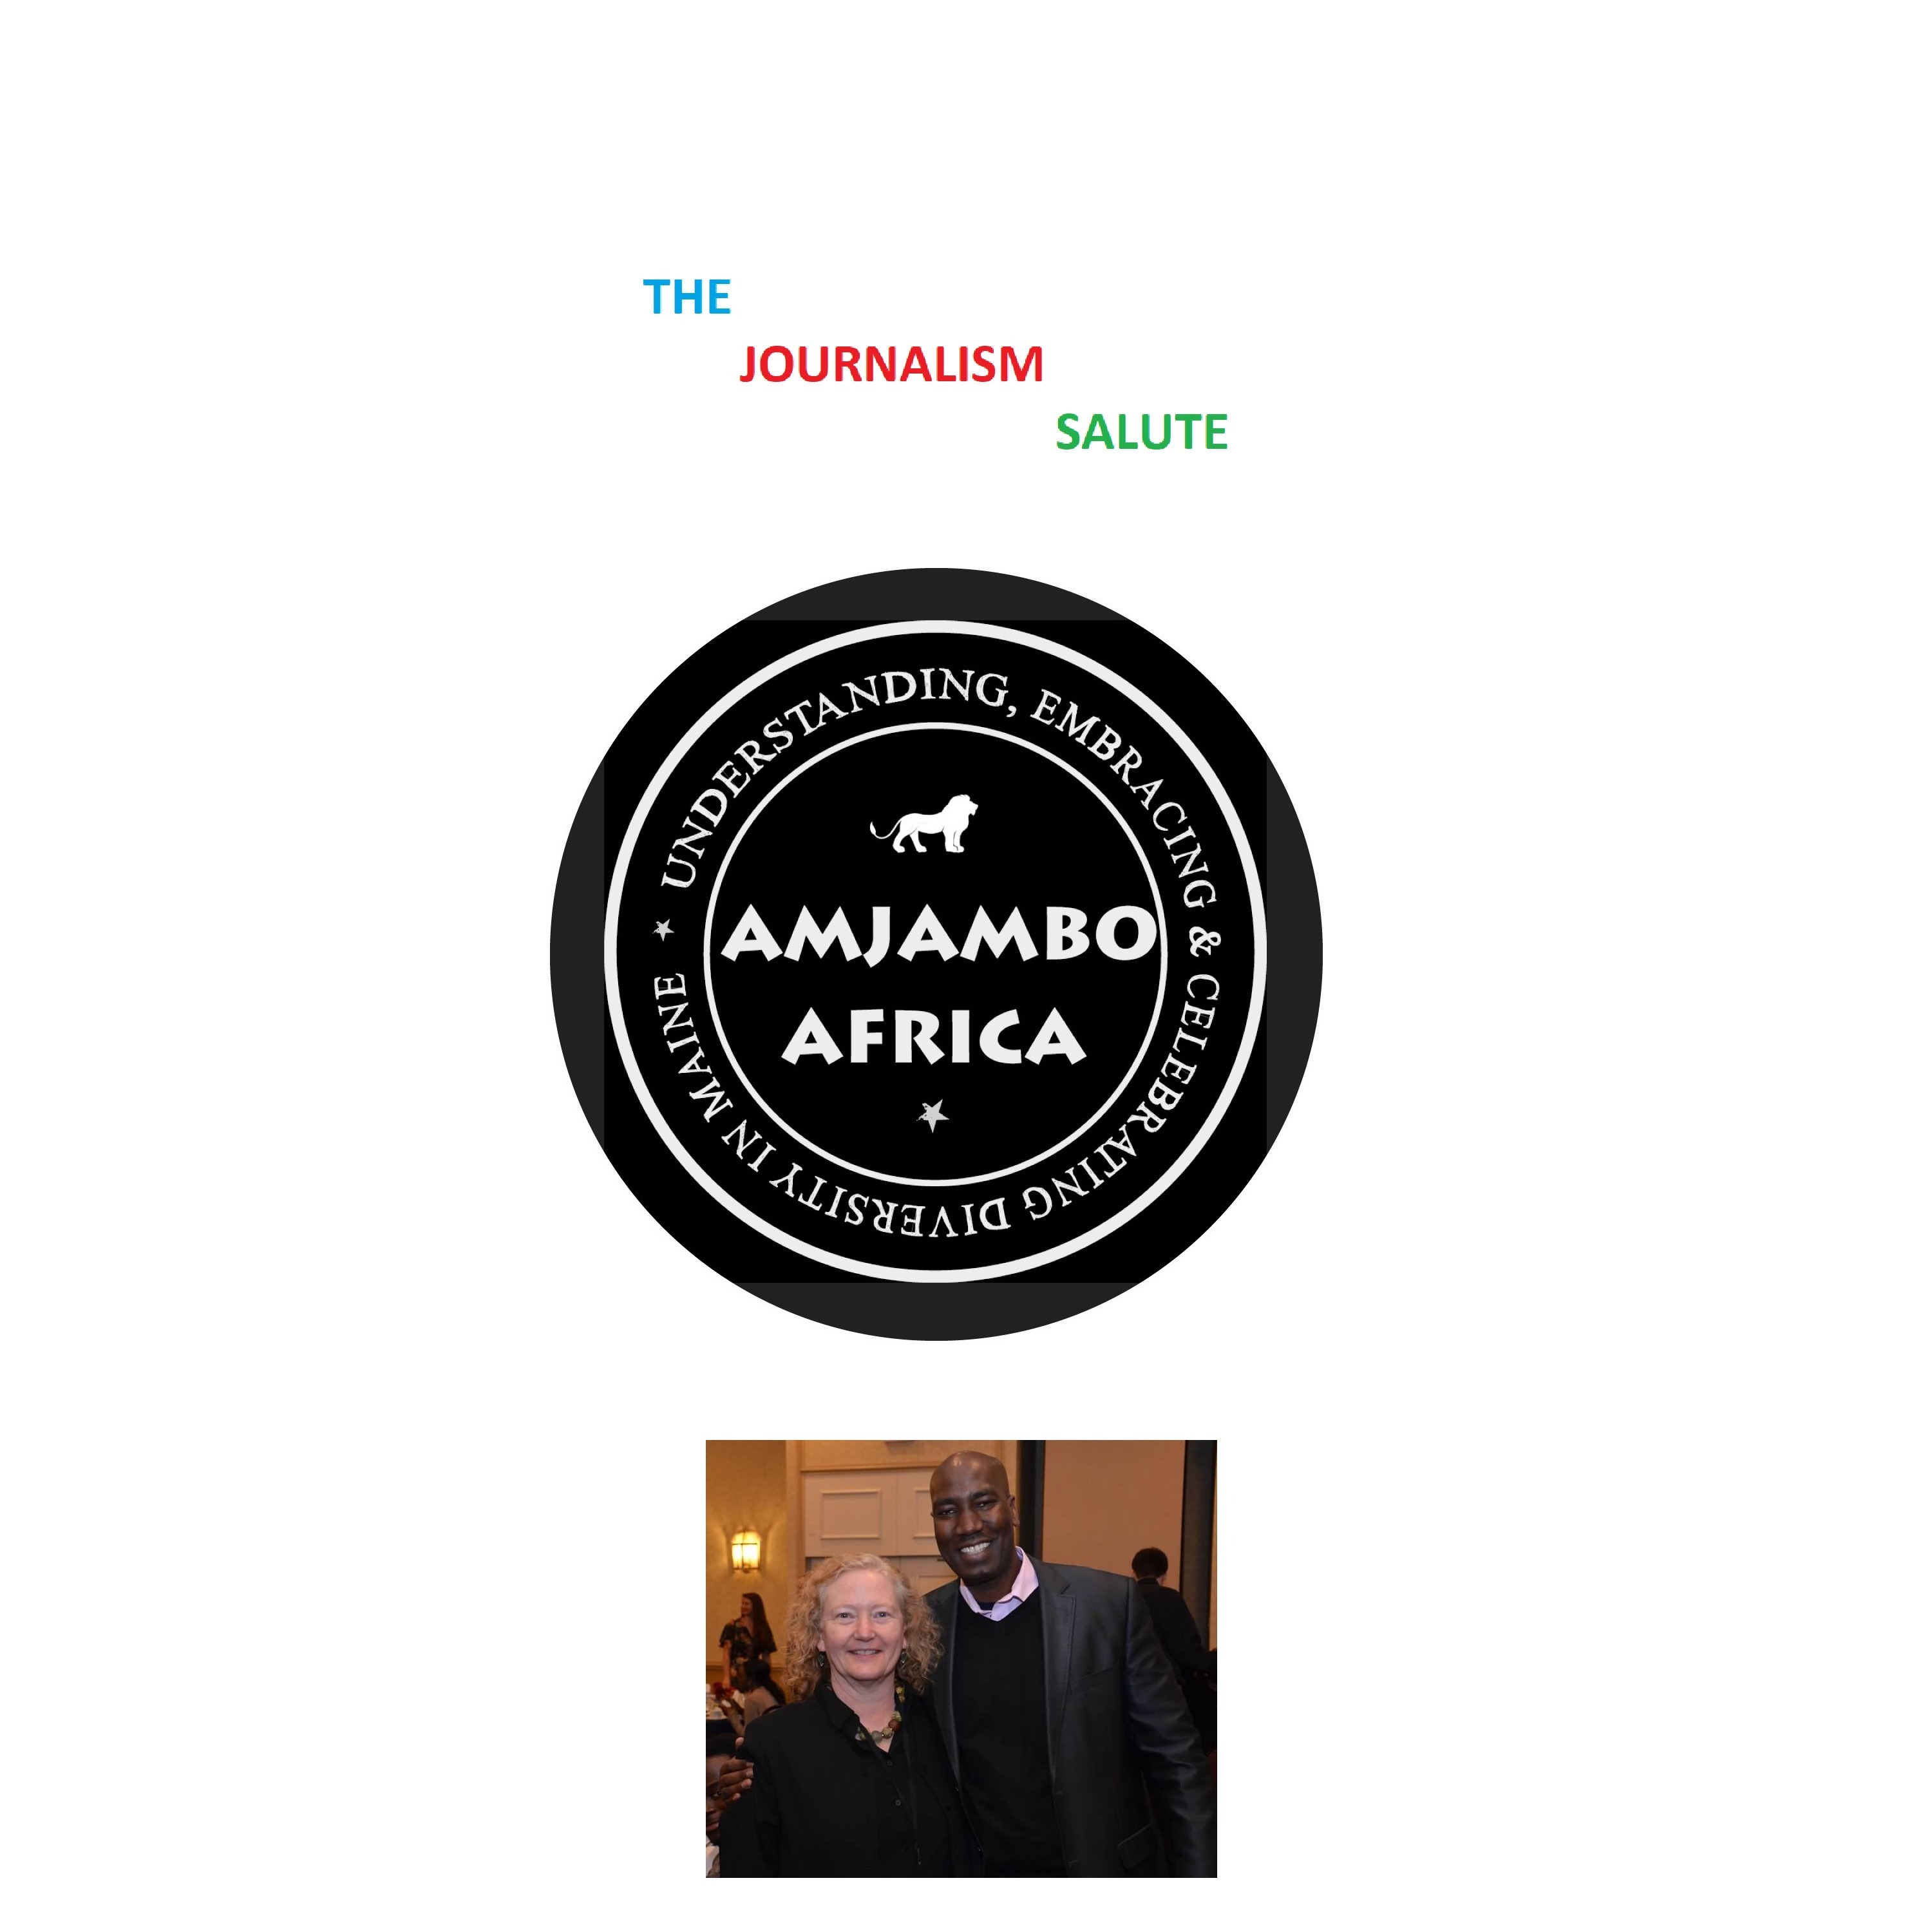 Amjambo Africa: Georges Budagu Makoko & Kathreen Harrison On Covering The African Experience in Maine